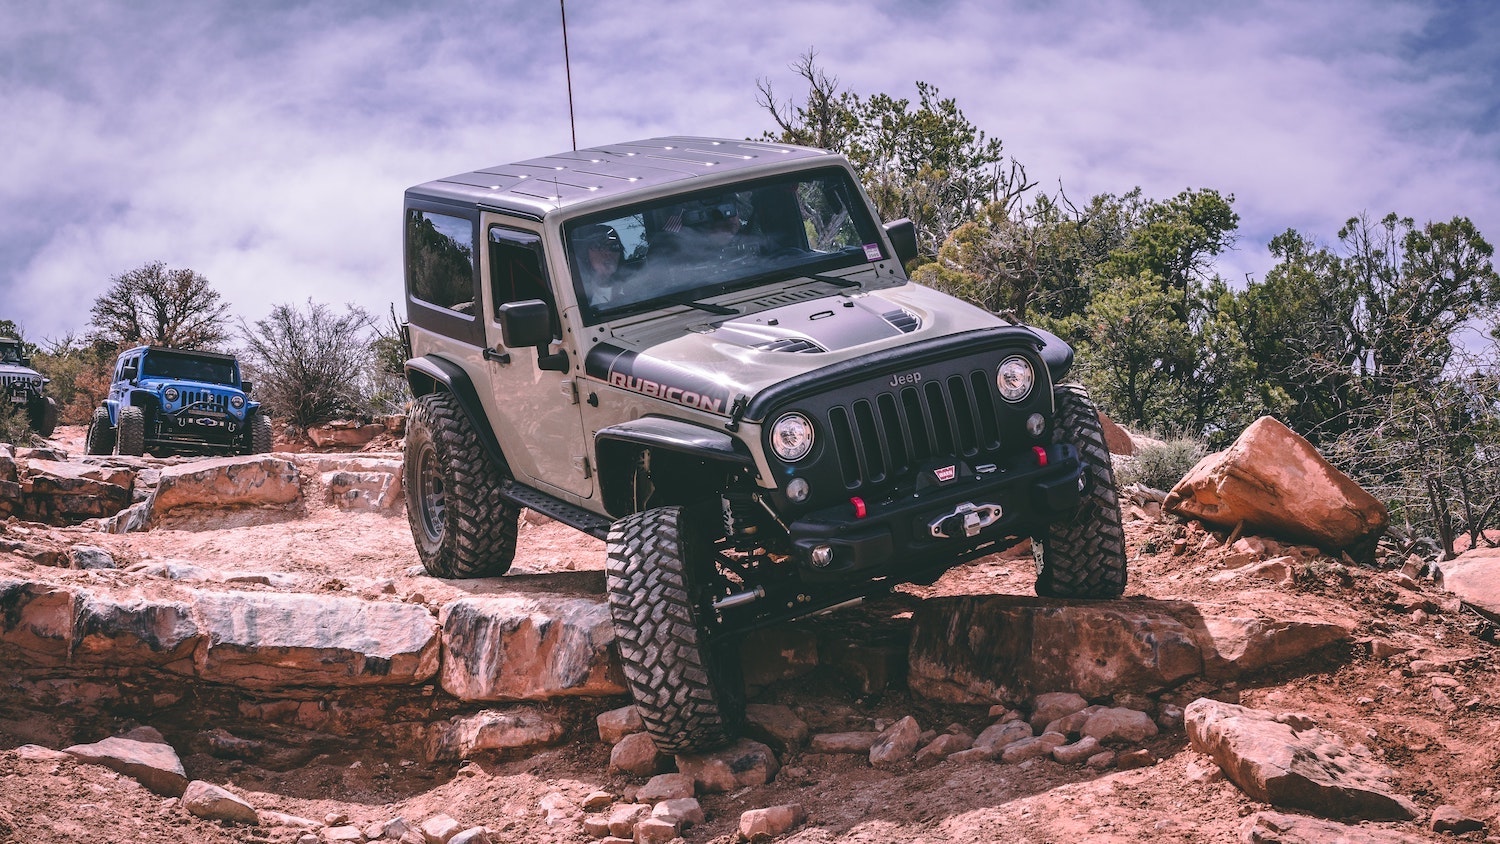 Gray Jeep Wrangler Rubicon navigating a boulder in a 4x4 off-roading trail.